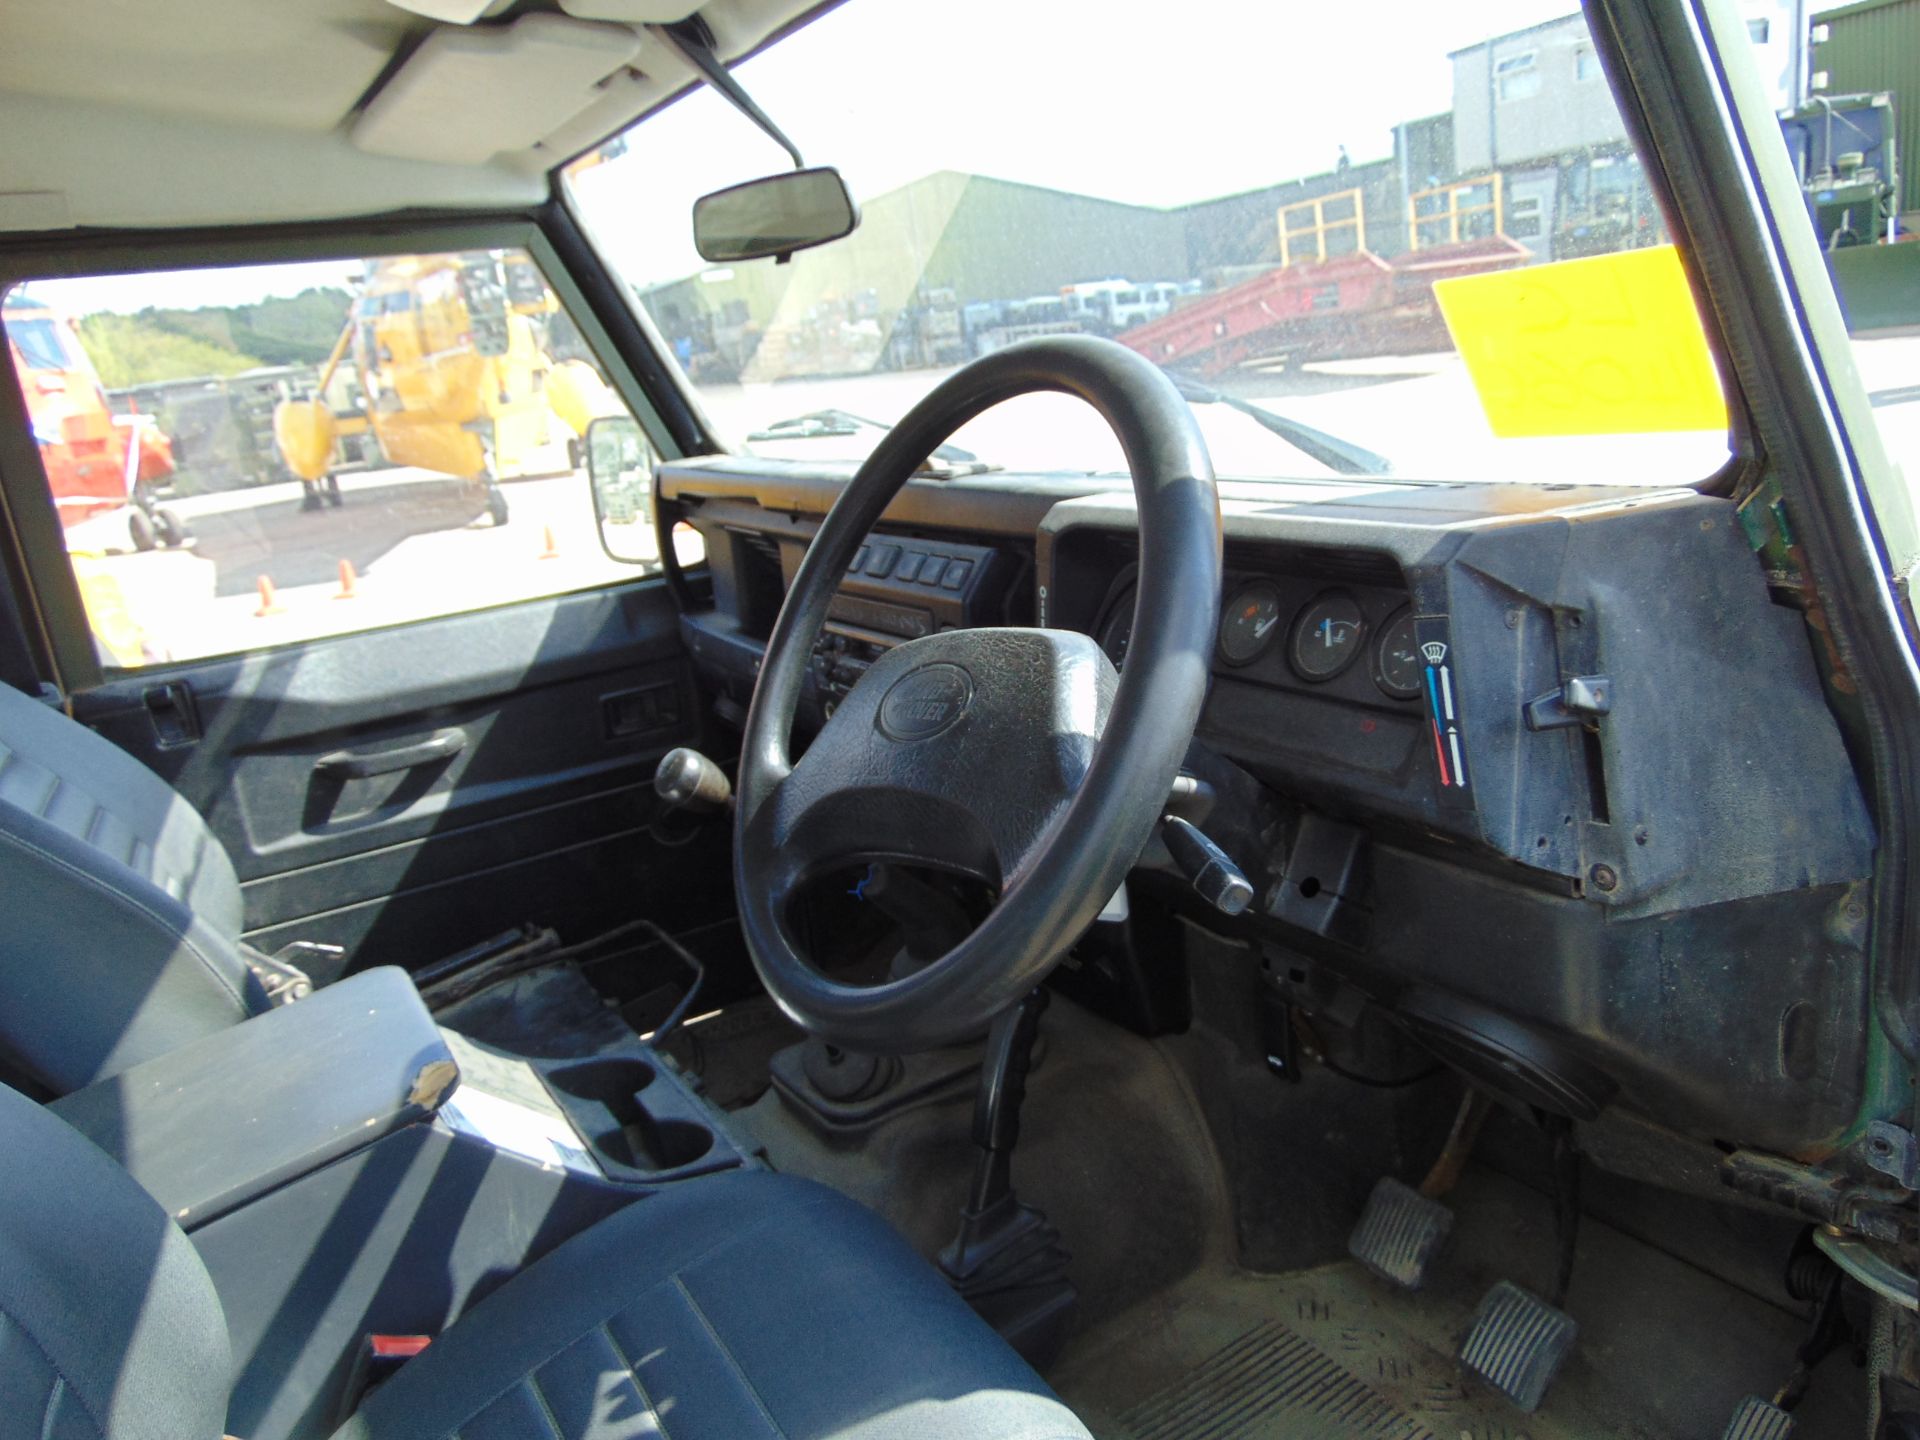 Land Rover Defender 130 TD5 Double Cab Pick Up - Image 16 of 23